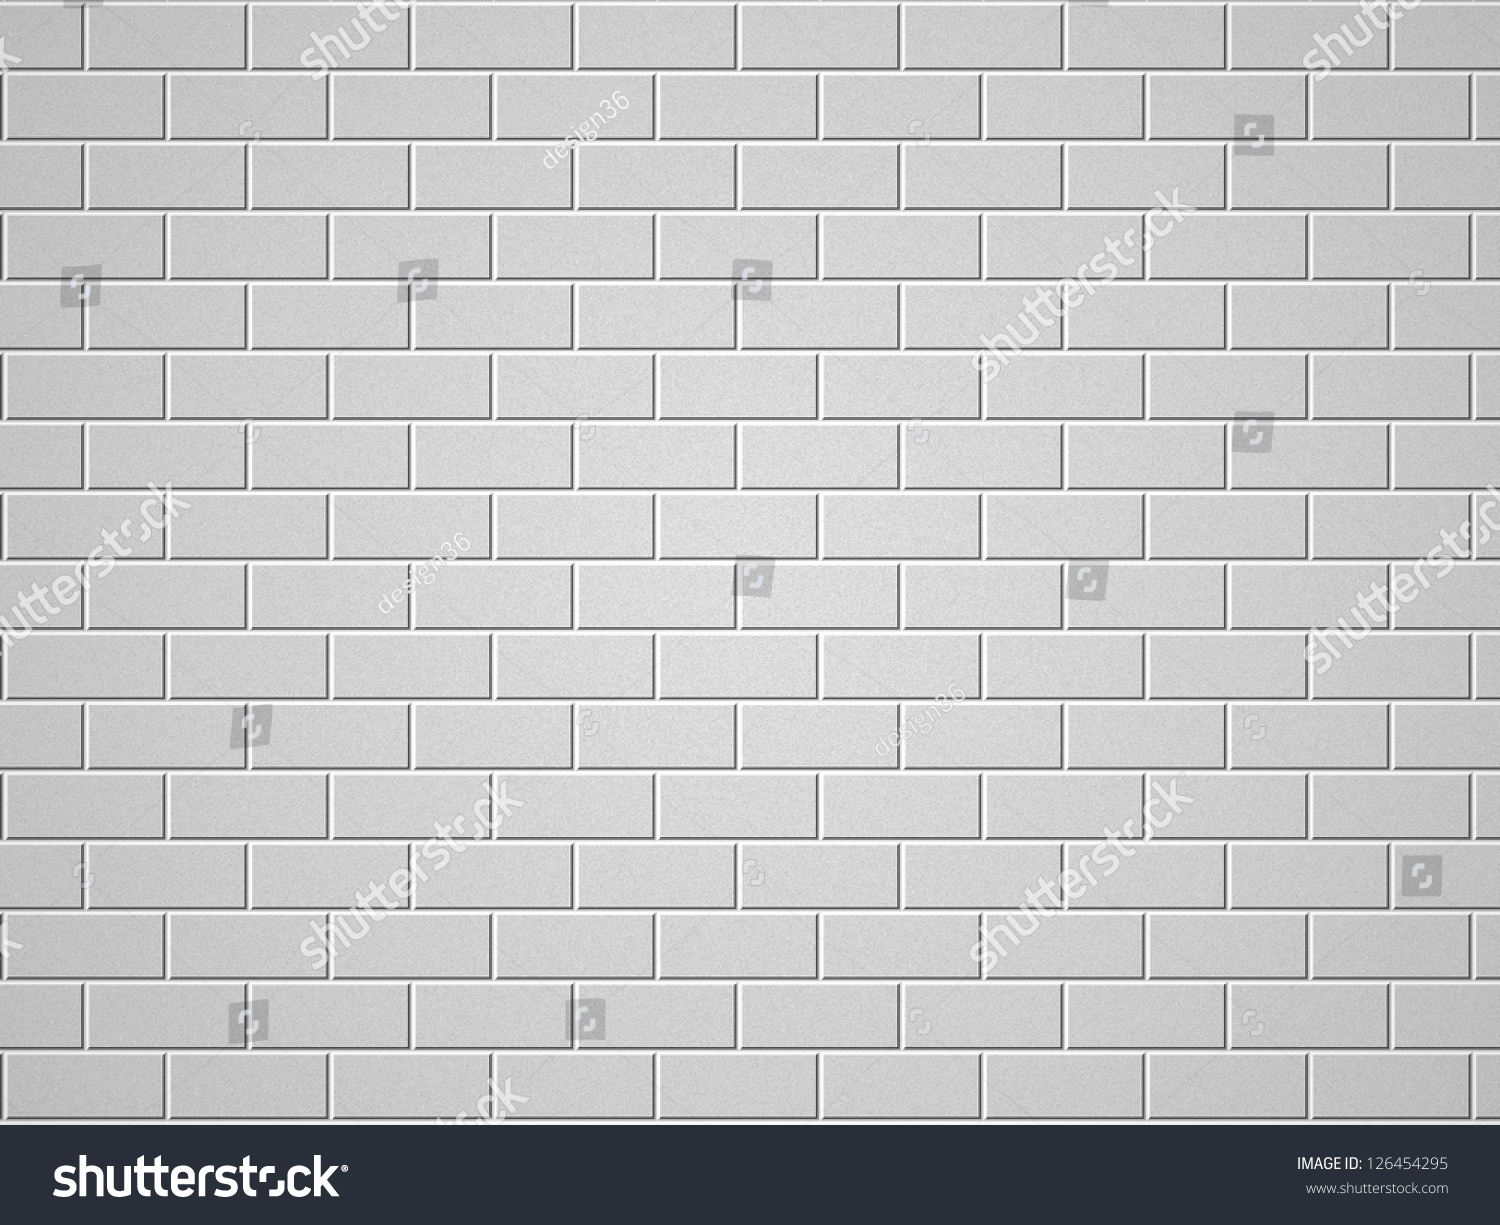 High Resolution Concept Or Conceptual White Brick Wall Texture Or ...